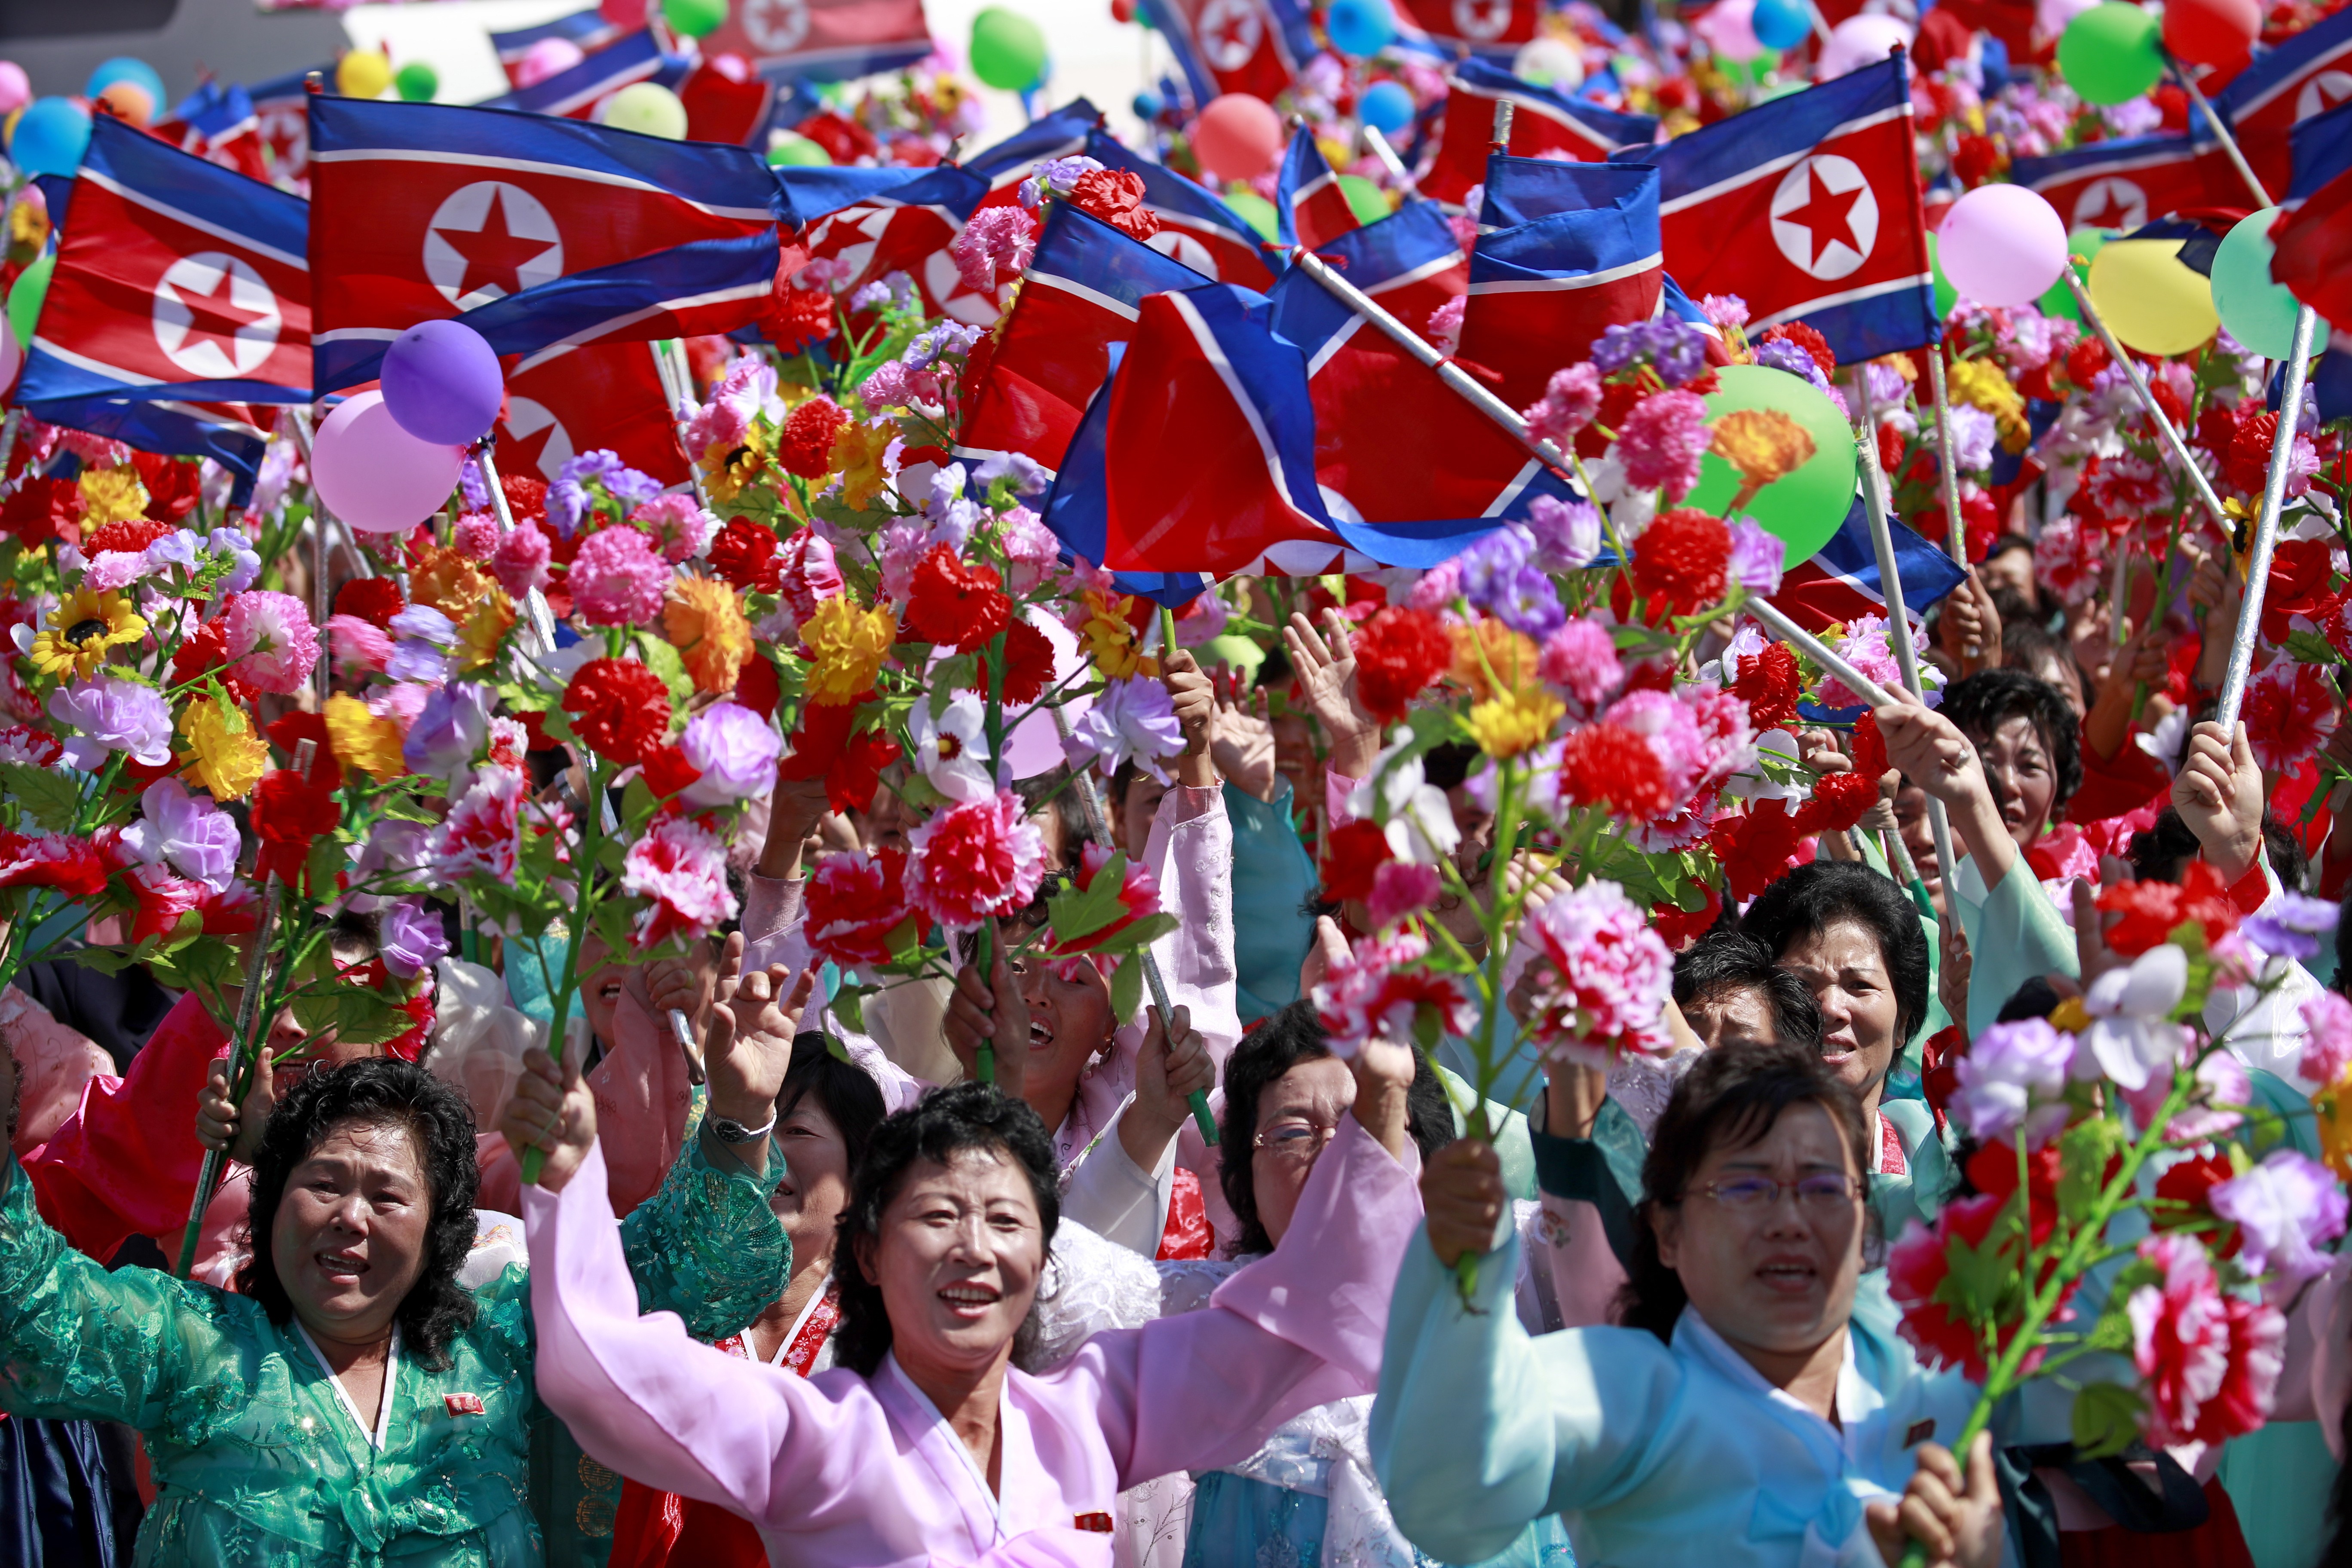 North Koreans cheer during a parade celebrating National Day and the 70th anniversary of the country’s foundation, in Pyongyang, on September 8. While experts have focused on North Korea’s mineral and hydrocarbon resources, nurturing its people may reap better results. Photo: EPA-EFE